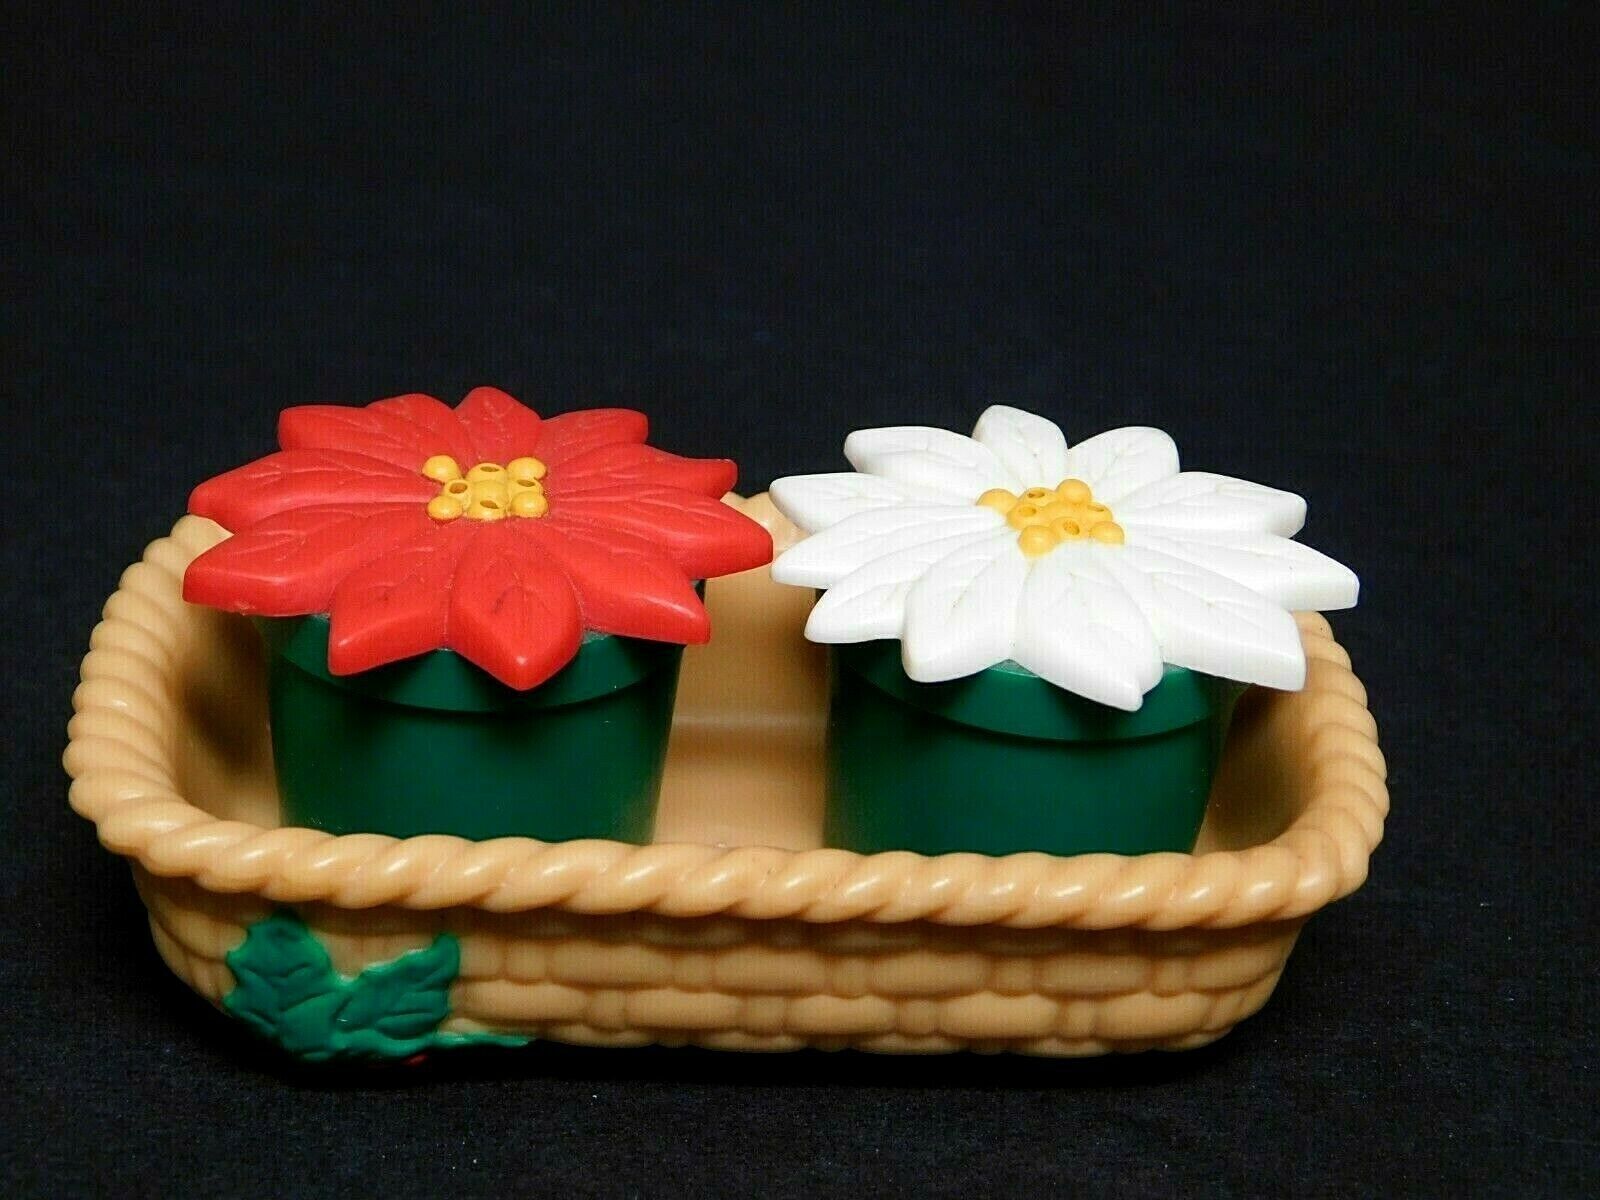 When Were Avon Collectibles Poinsettia Salt And Pepper Shakers Sold?